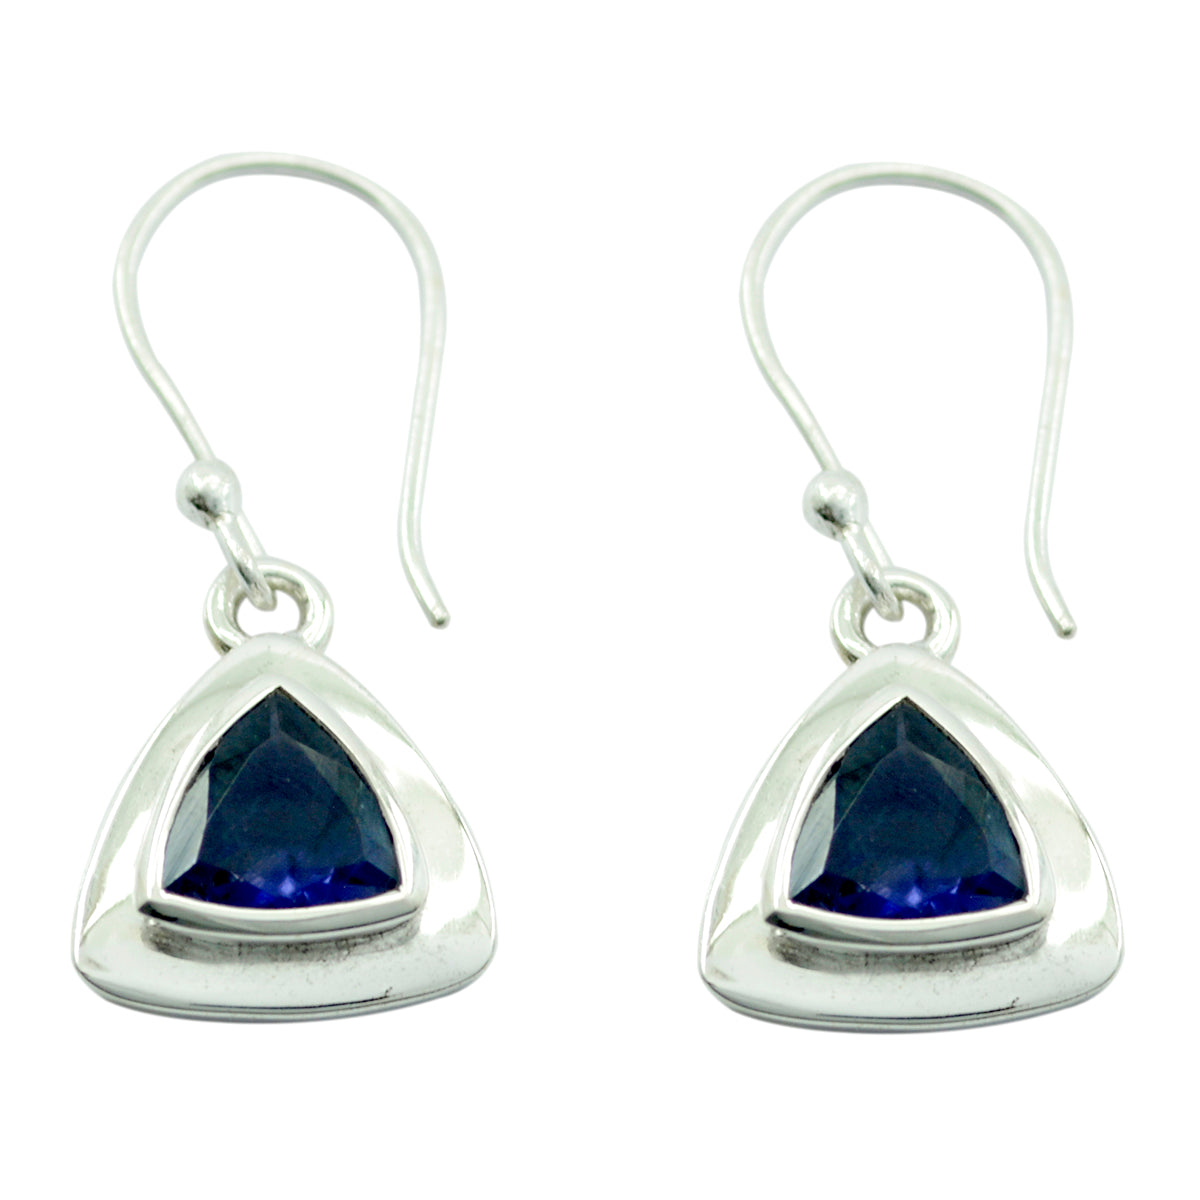 Riyo Nice Gemstone trillion Faceted Nevy Blue Iolite Silver Earrings gift for mothers day